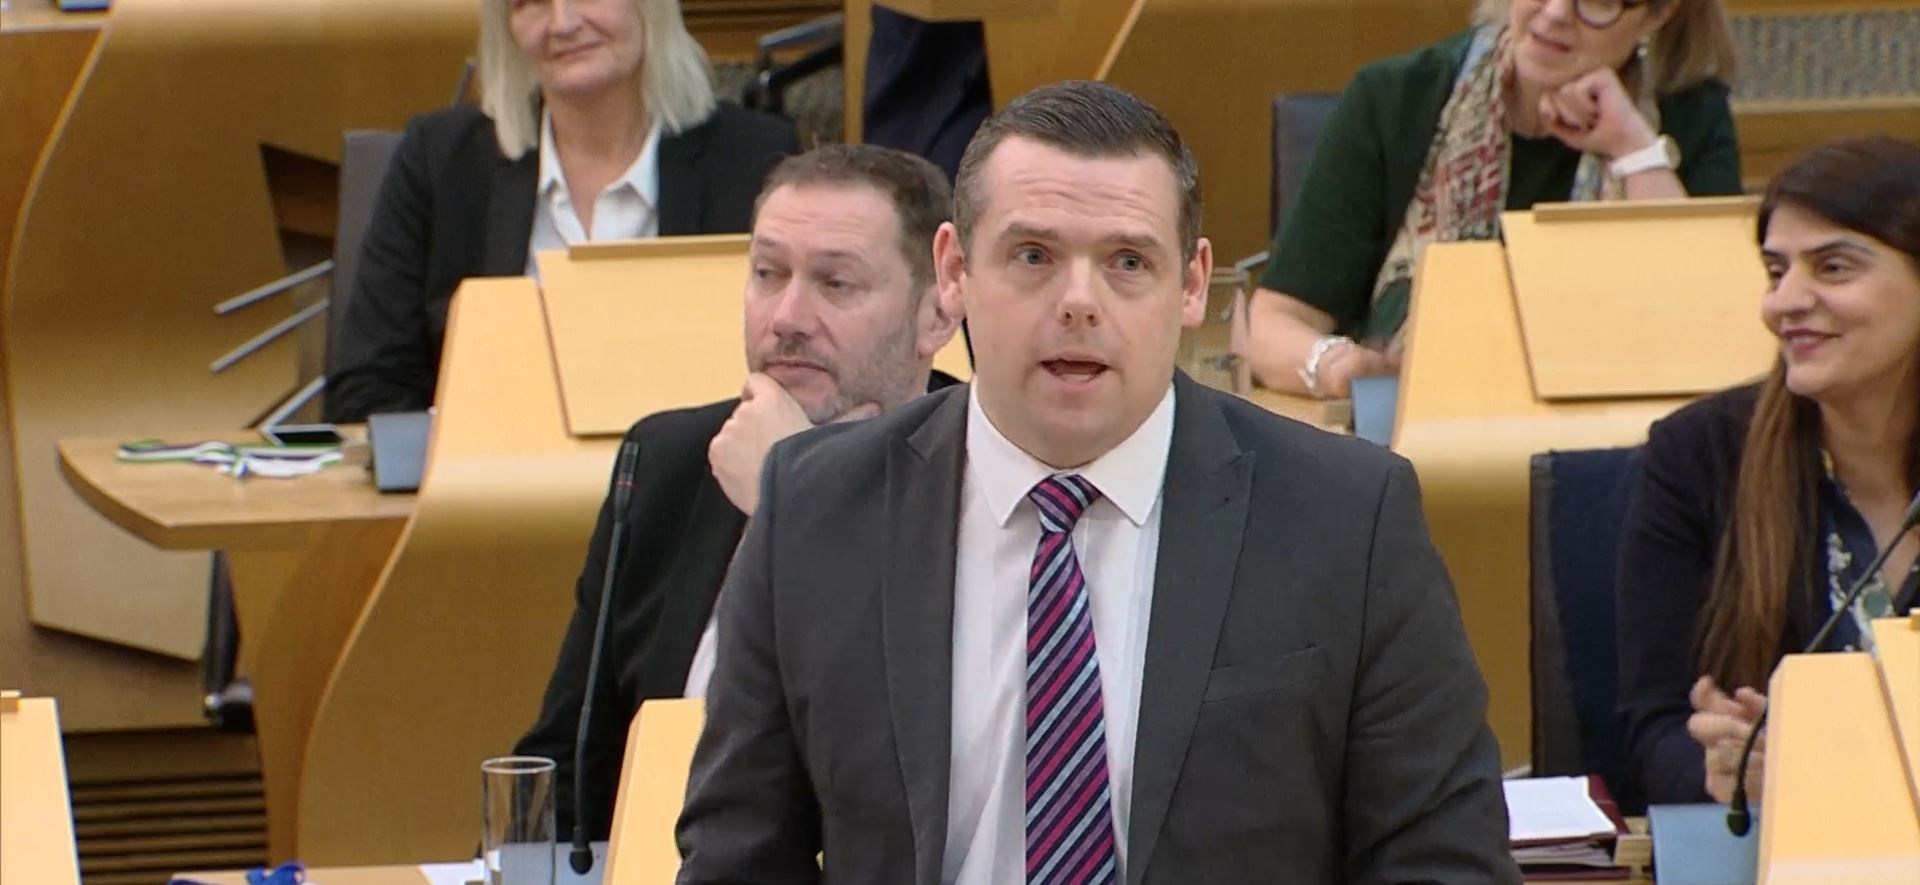 Scottish Conservative leader Douglas Ross who is an MSP for the Highlands and Islands.